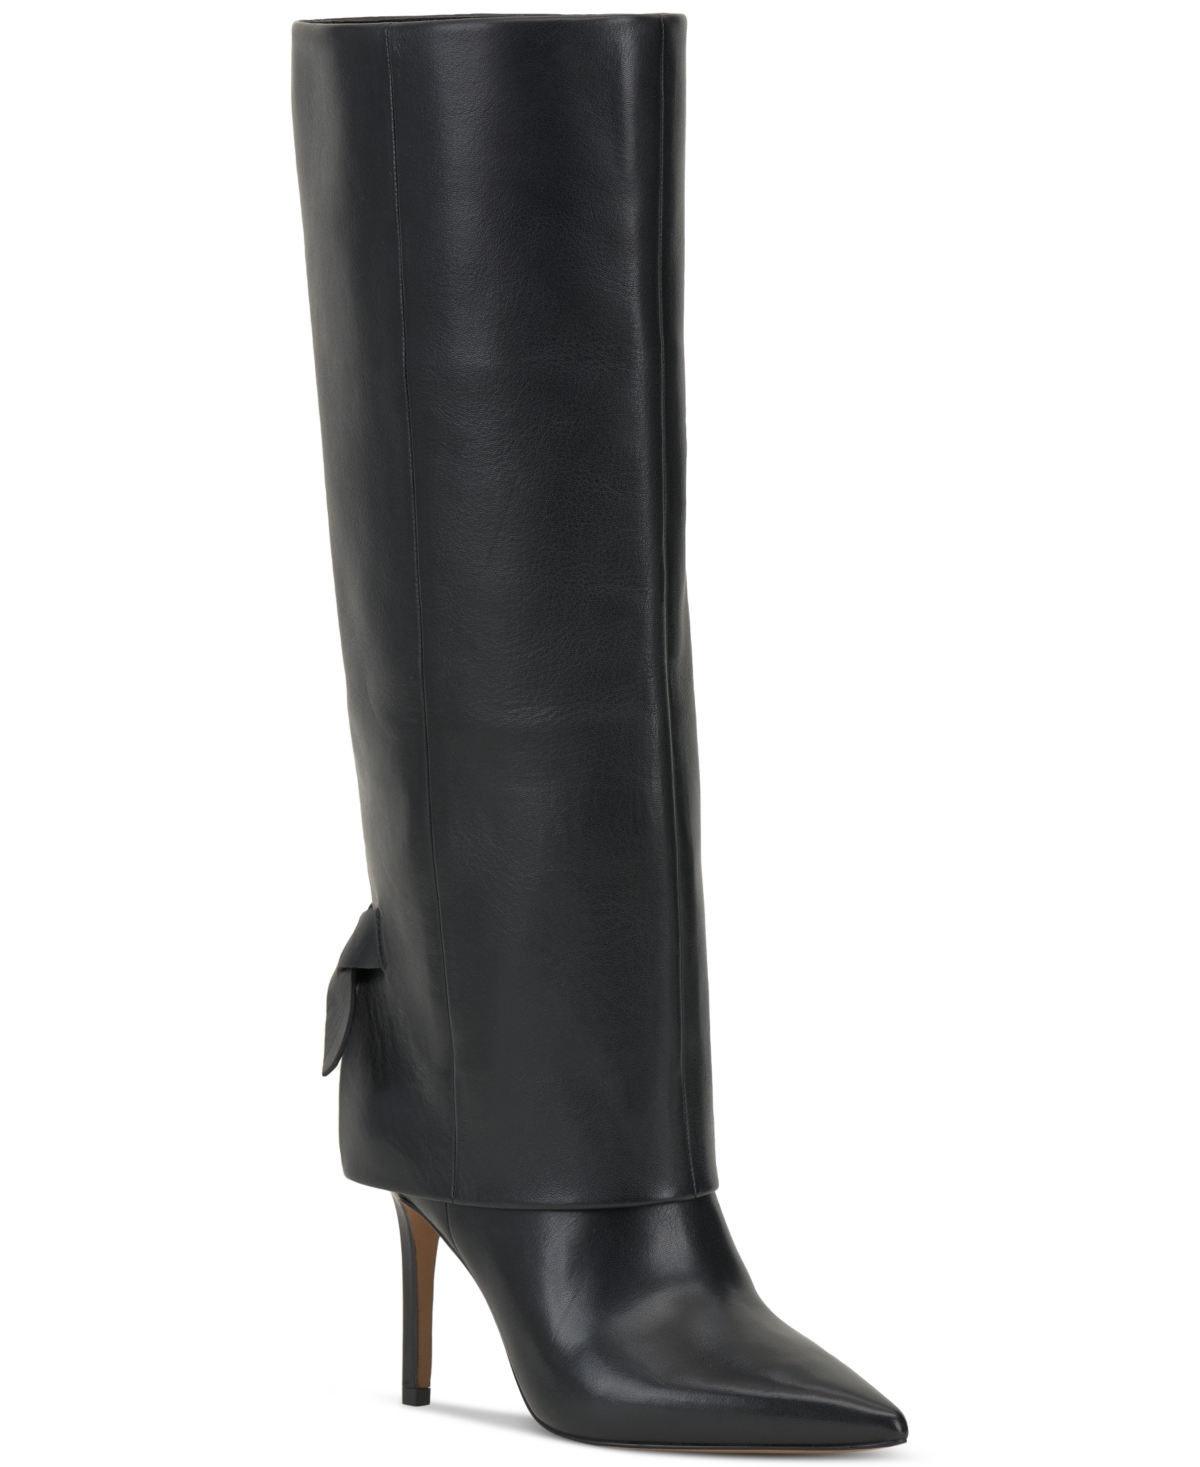 VINCE CAMUTO WOMEN'S KAMMITIE FOLD-OVER KNEE-HIGH STILETTO DRESS BOOTS